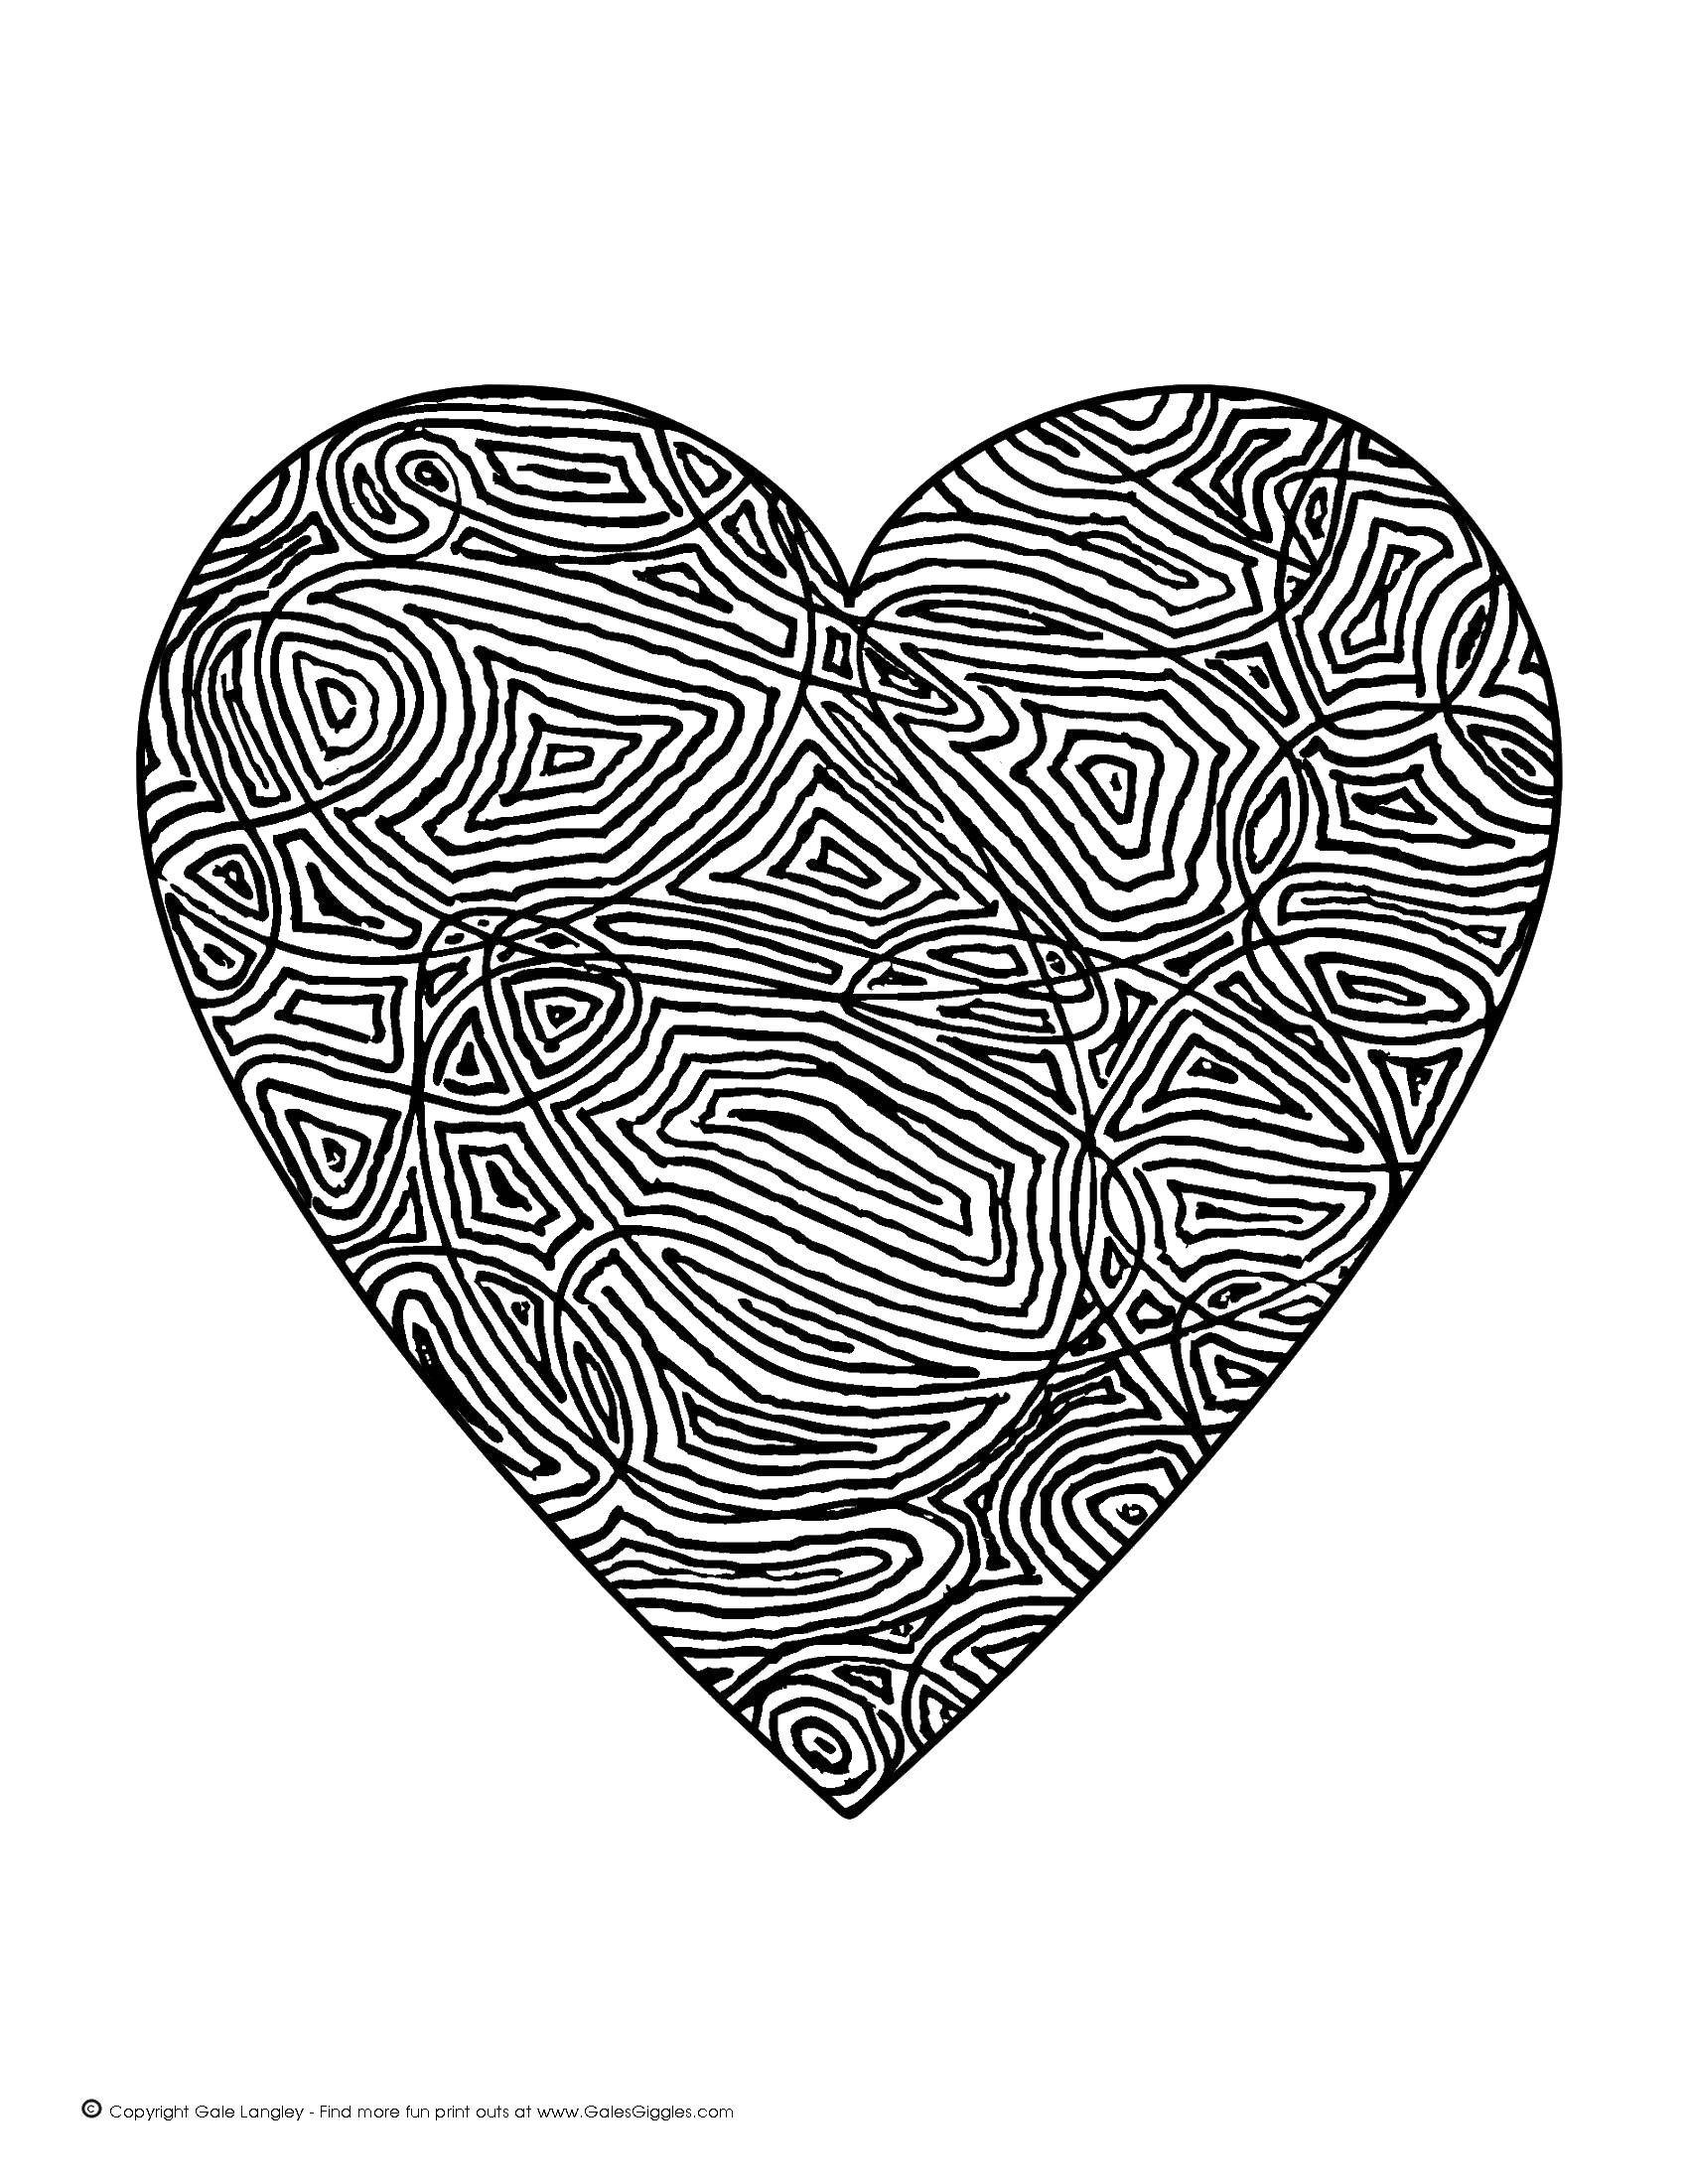 Harmonious complex heart coloring page